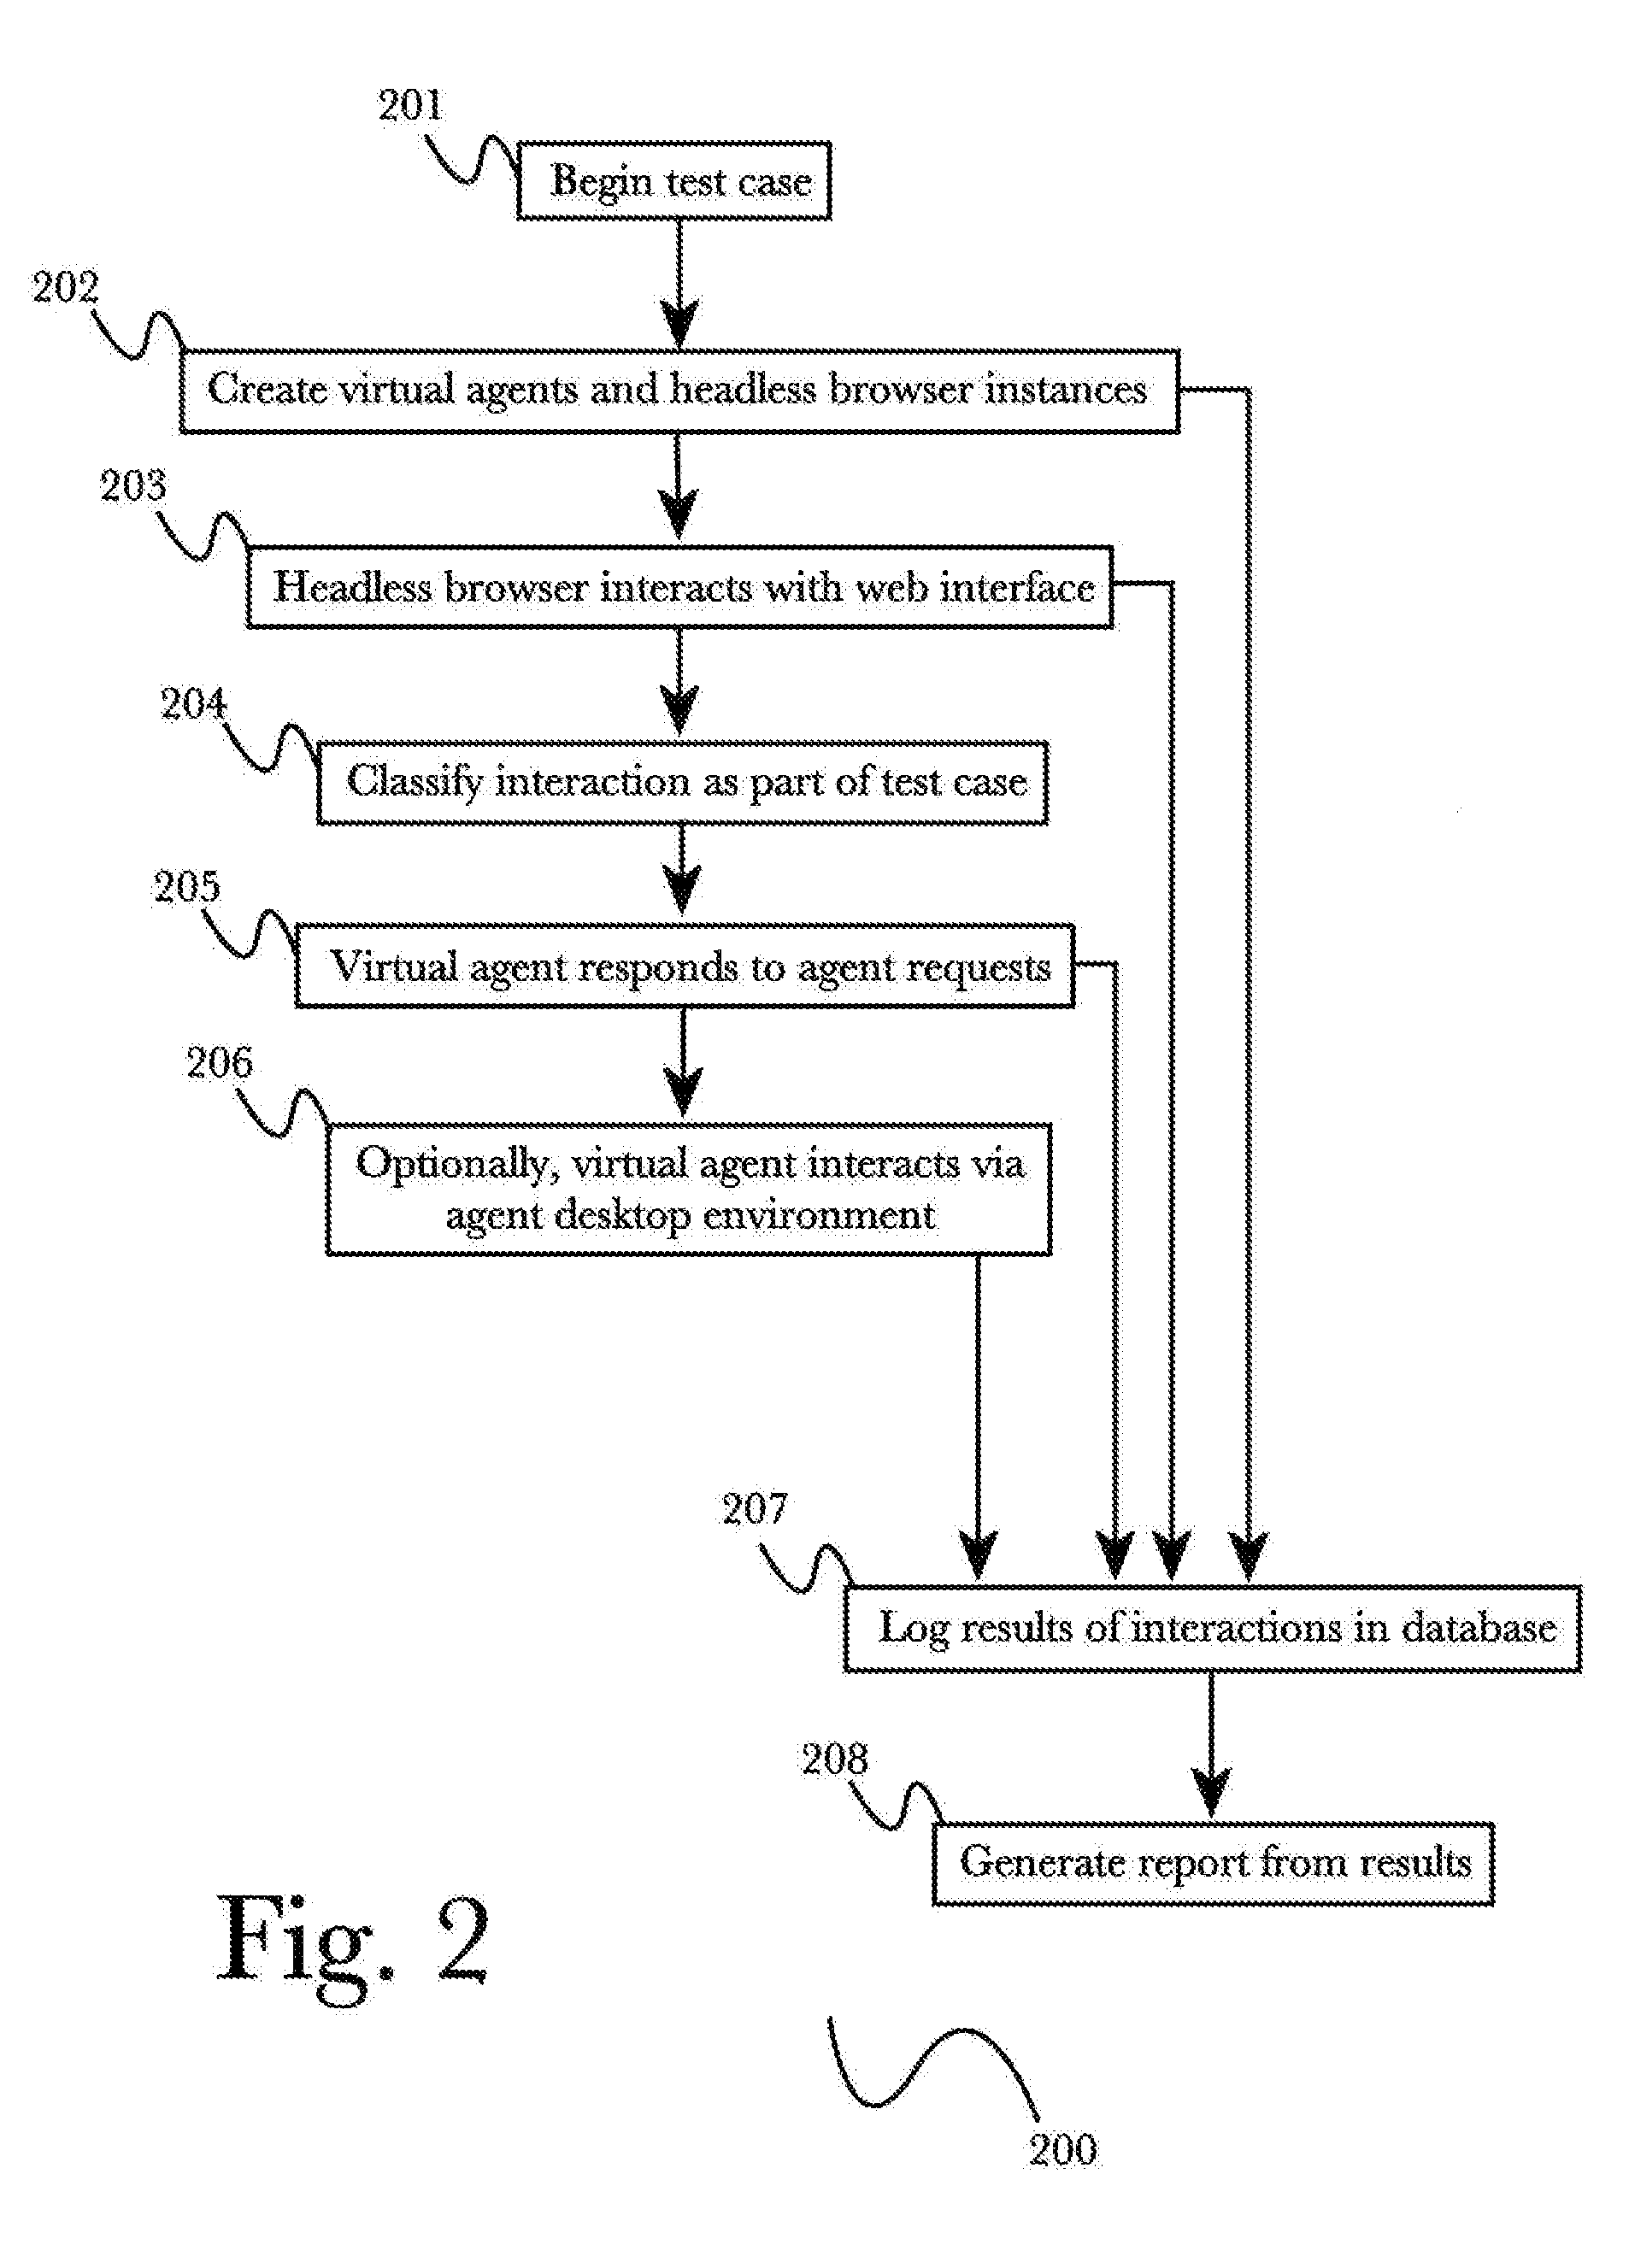 System and method for automated end-to-end web interaction testing